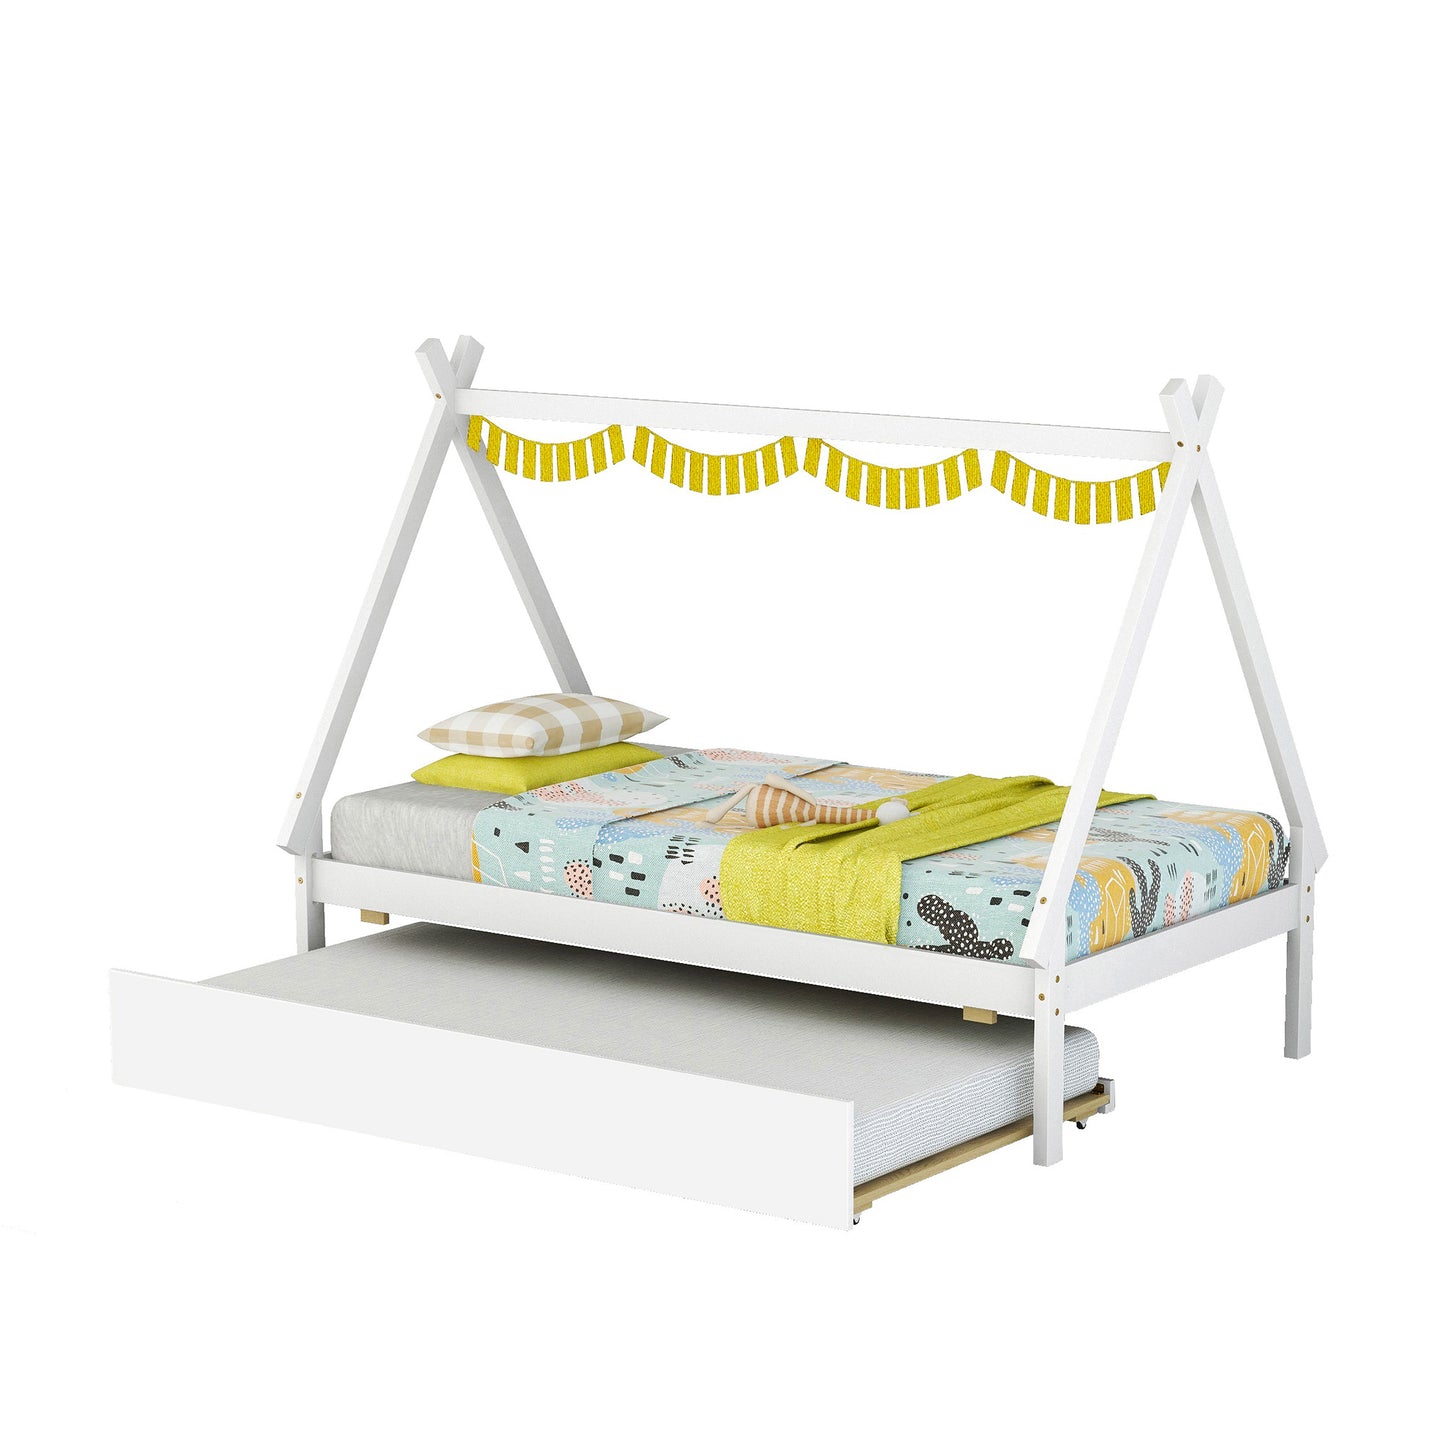 Twin size Tent Floor Platform Bed, Teepee Bed, with Trundle,White